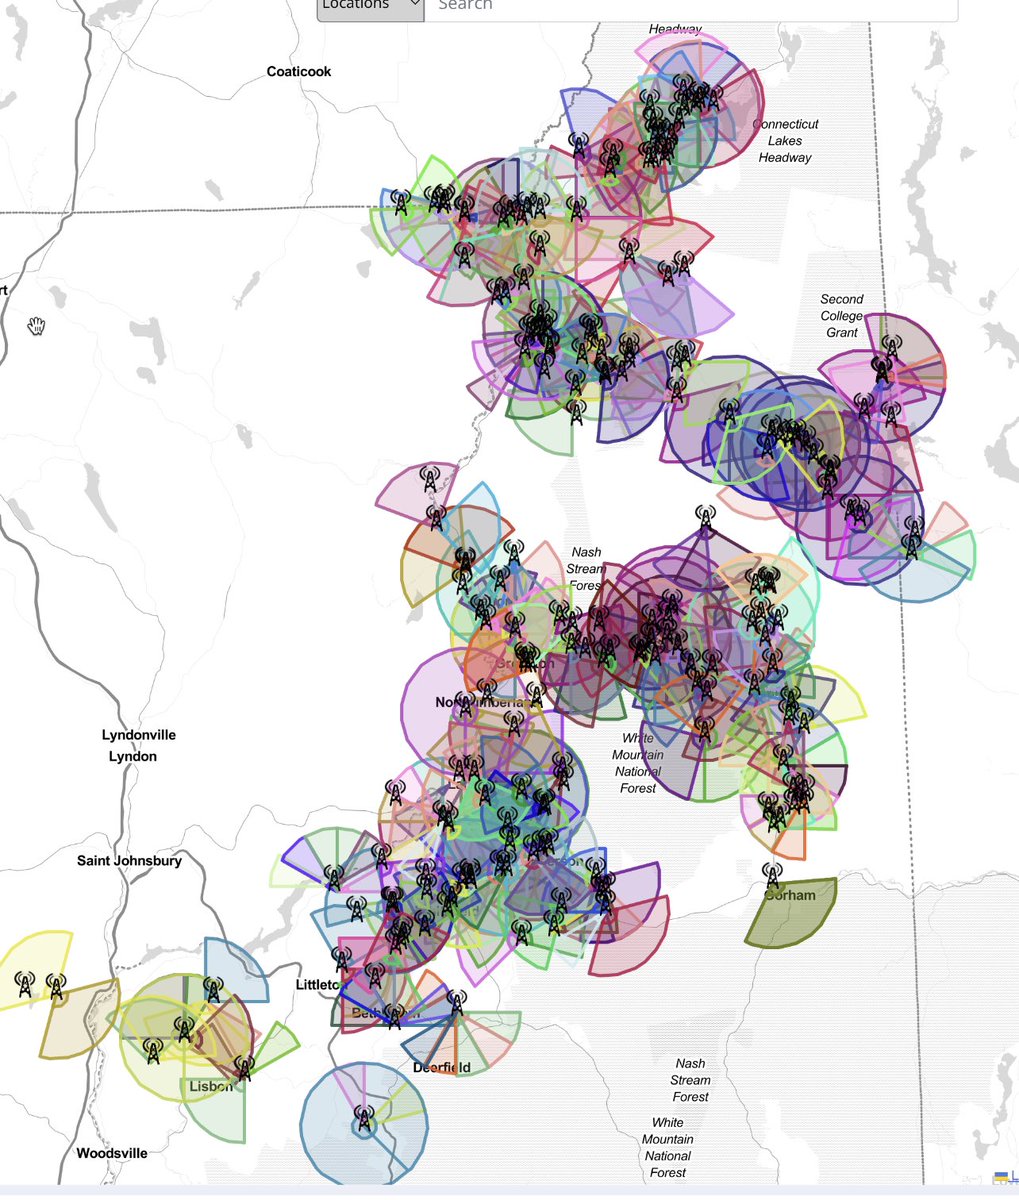 Coverage area of NH-ME -VT Netafy Internet services - As conservatively stated in BDC filing. Without our FWA (unlicensed spectrum) almost 3000 unserved and underserved homes and businesses would not be connected as they are today! #wispa